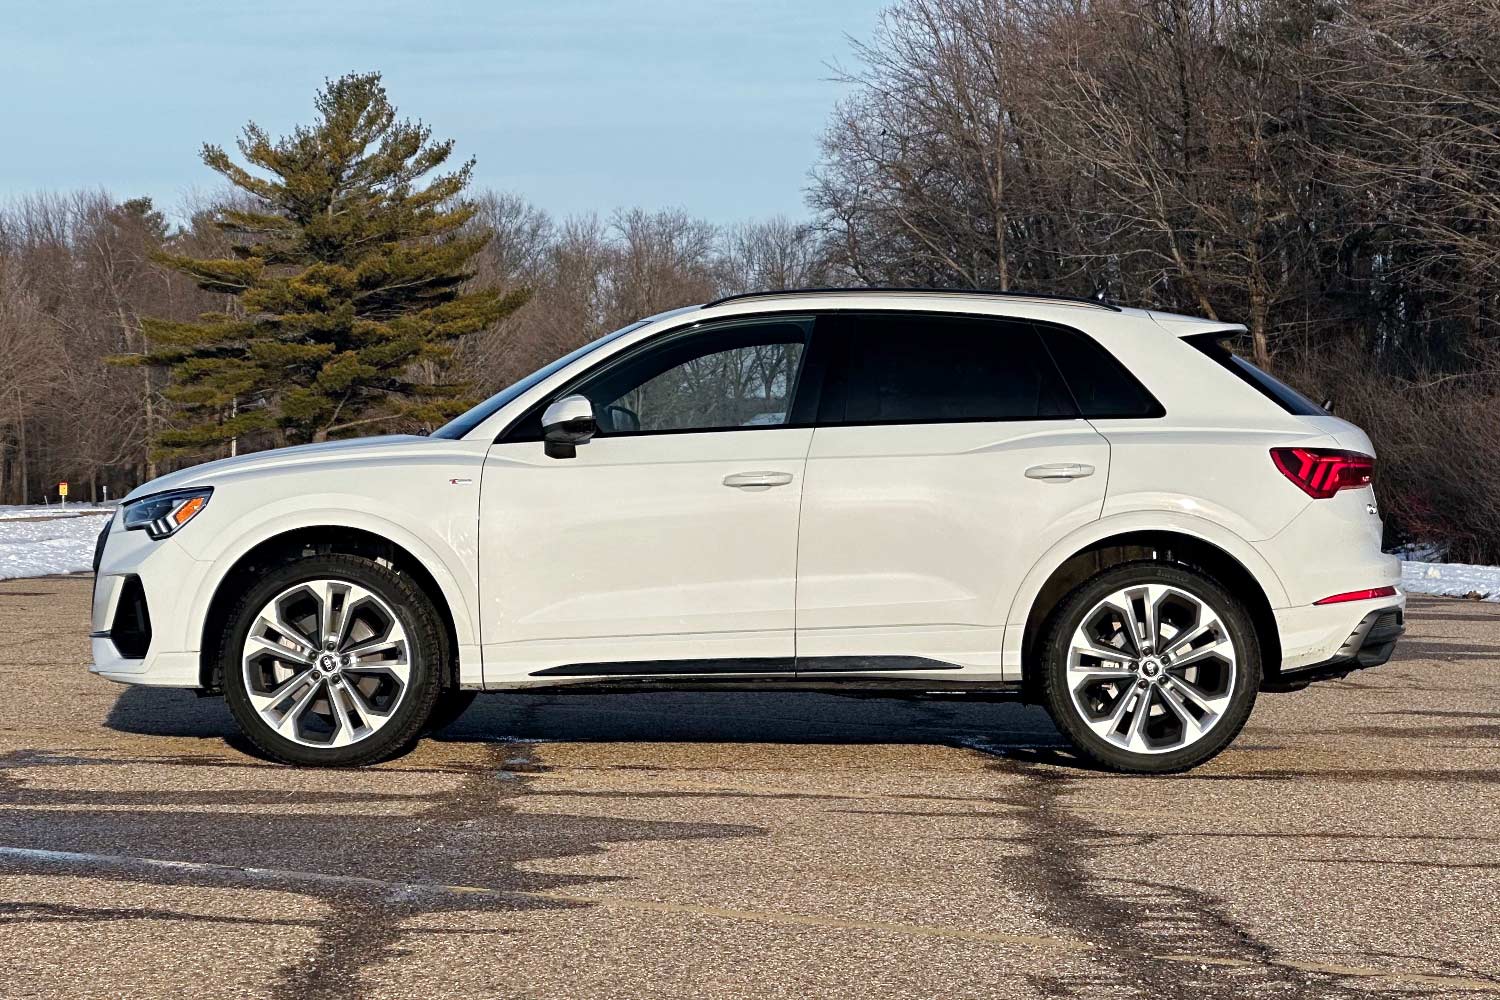 Side view of a white Audi Q3.